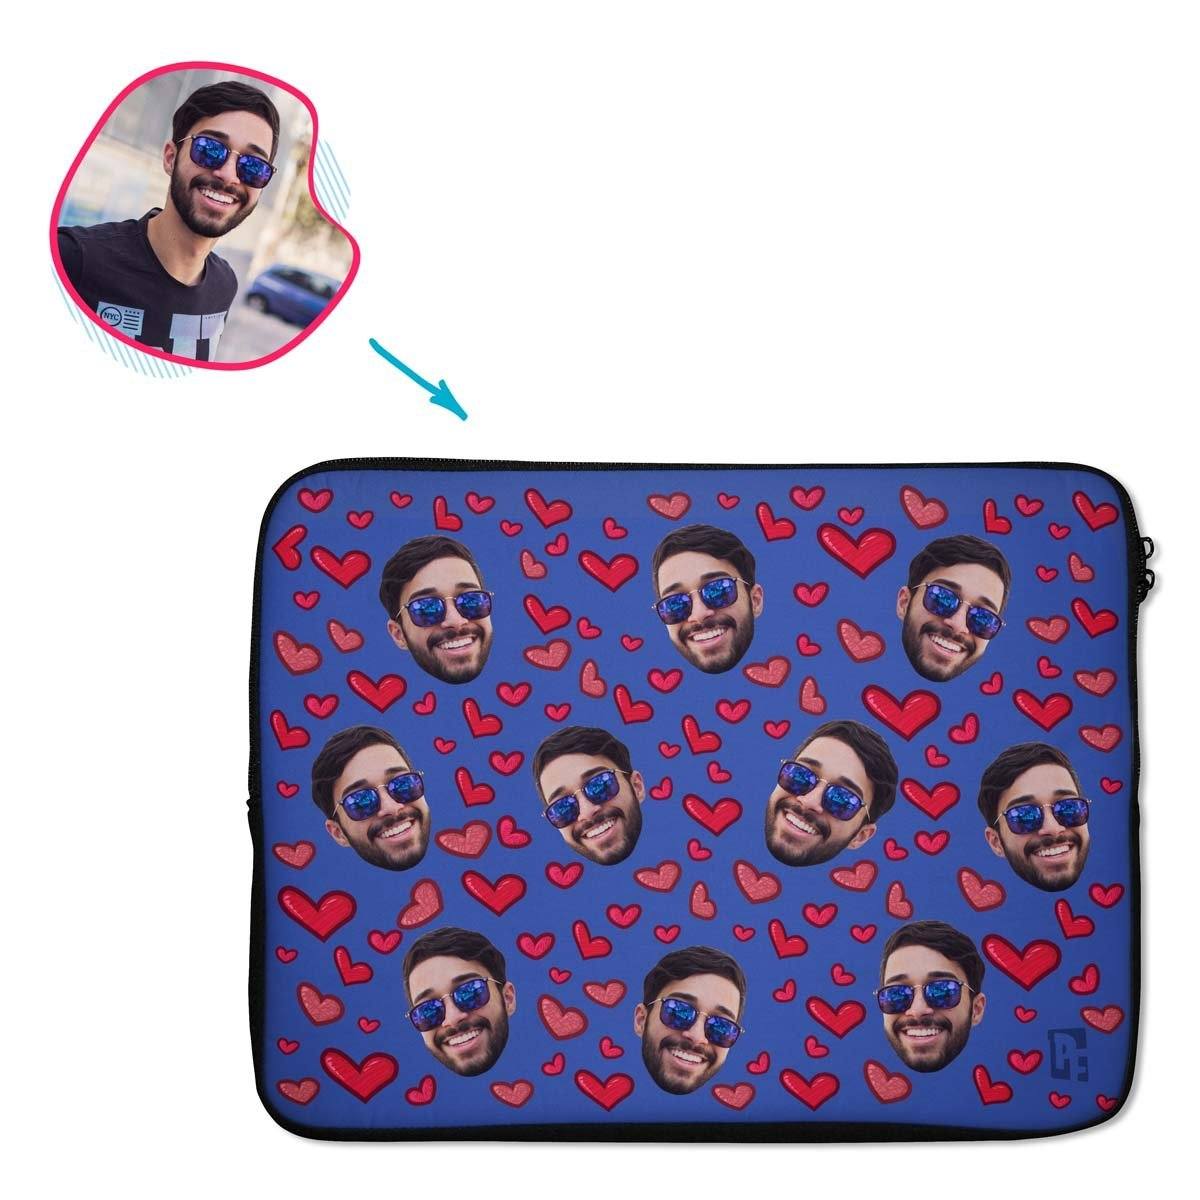 darkblue Heart laptop sleeve personalized with photo of face printed on them